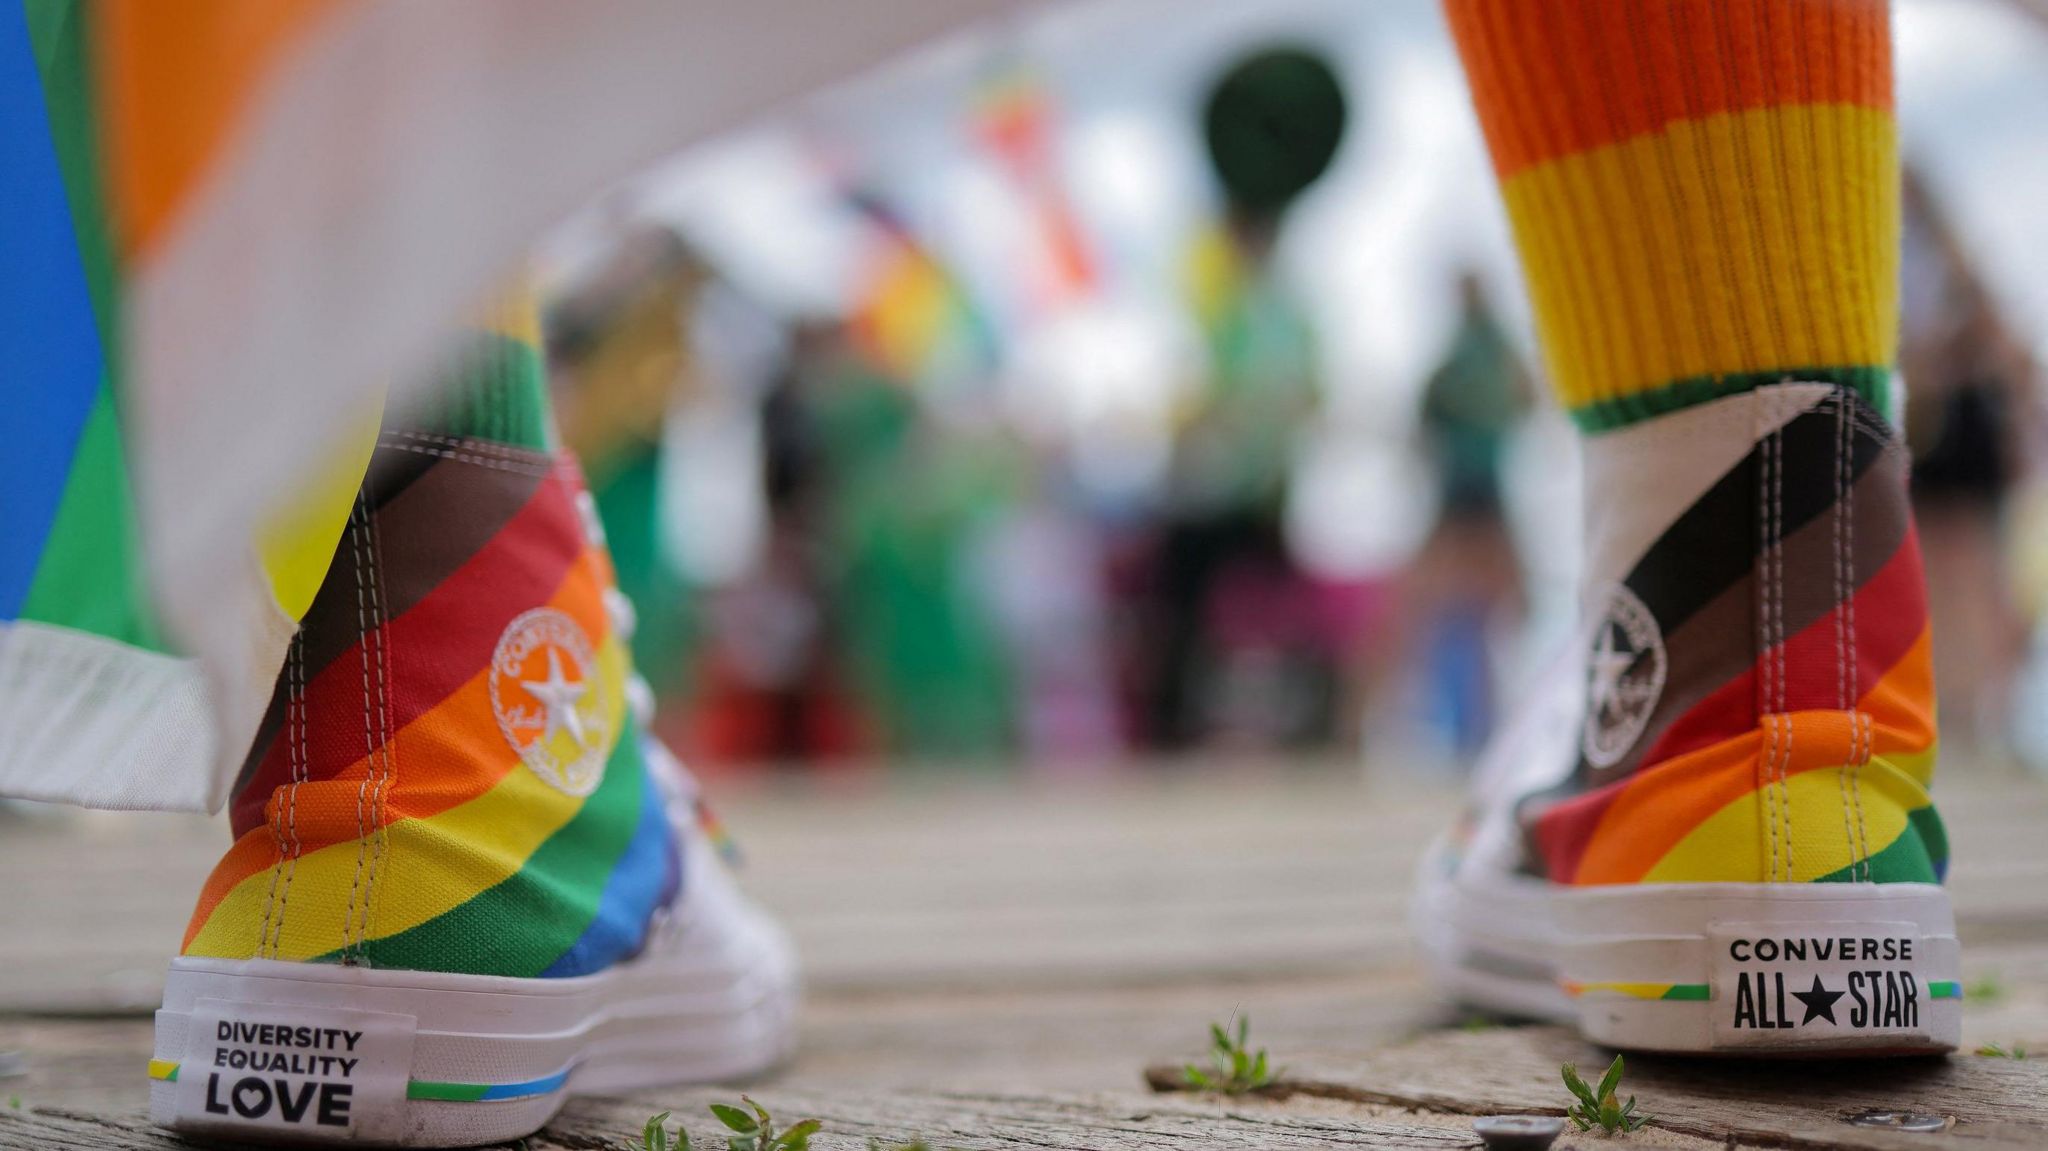 Rainbow trainers with the written words 'Diversity equality love'